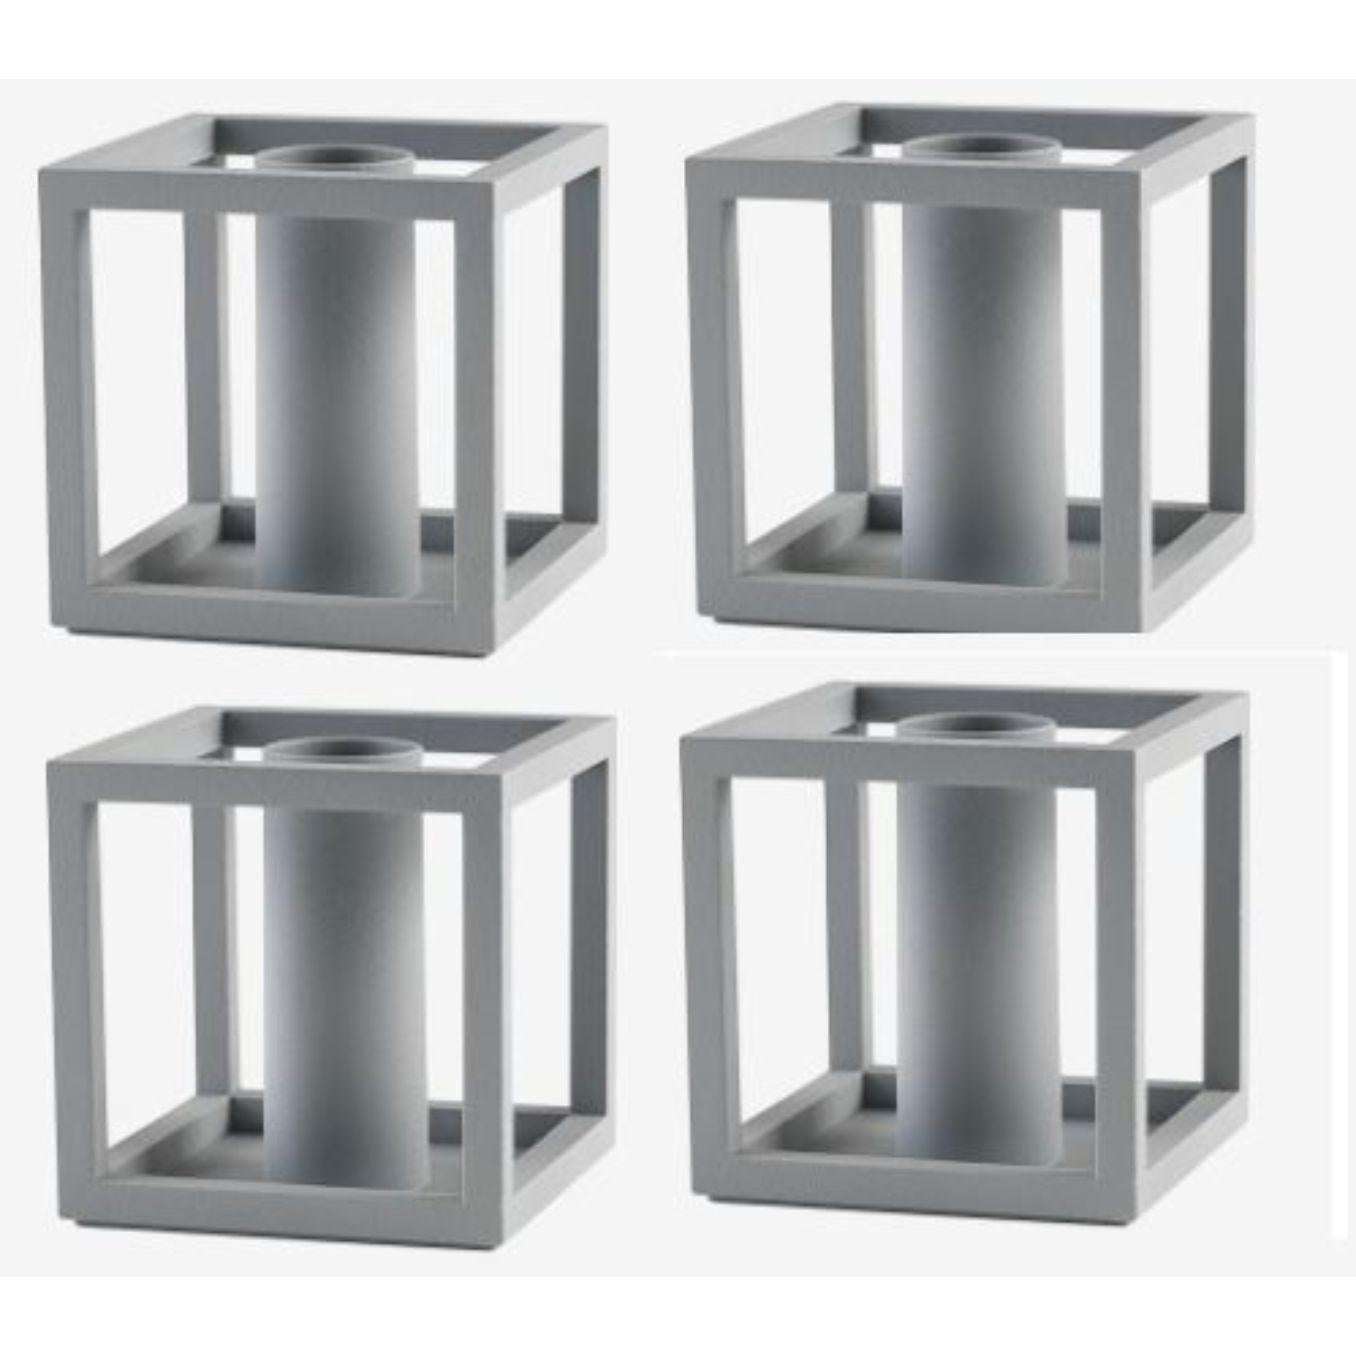 Set of 4 grey kubus 1 candle holders by Lassen
Dimensions: D 7 x W 7 x H 7 cm 
Materials: Metal 
Also available in different dimensions.
Weight: 0.40 kg

A new small wonder has seen the light of day. Kubus Micro is a stylish, smaller version